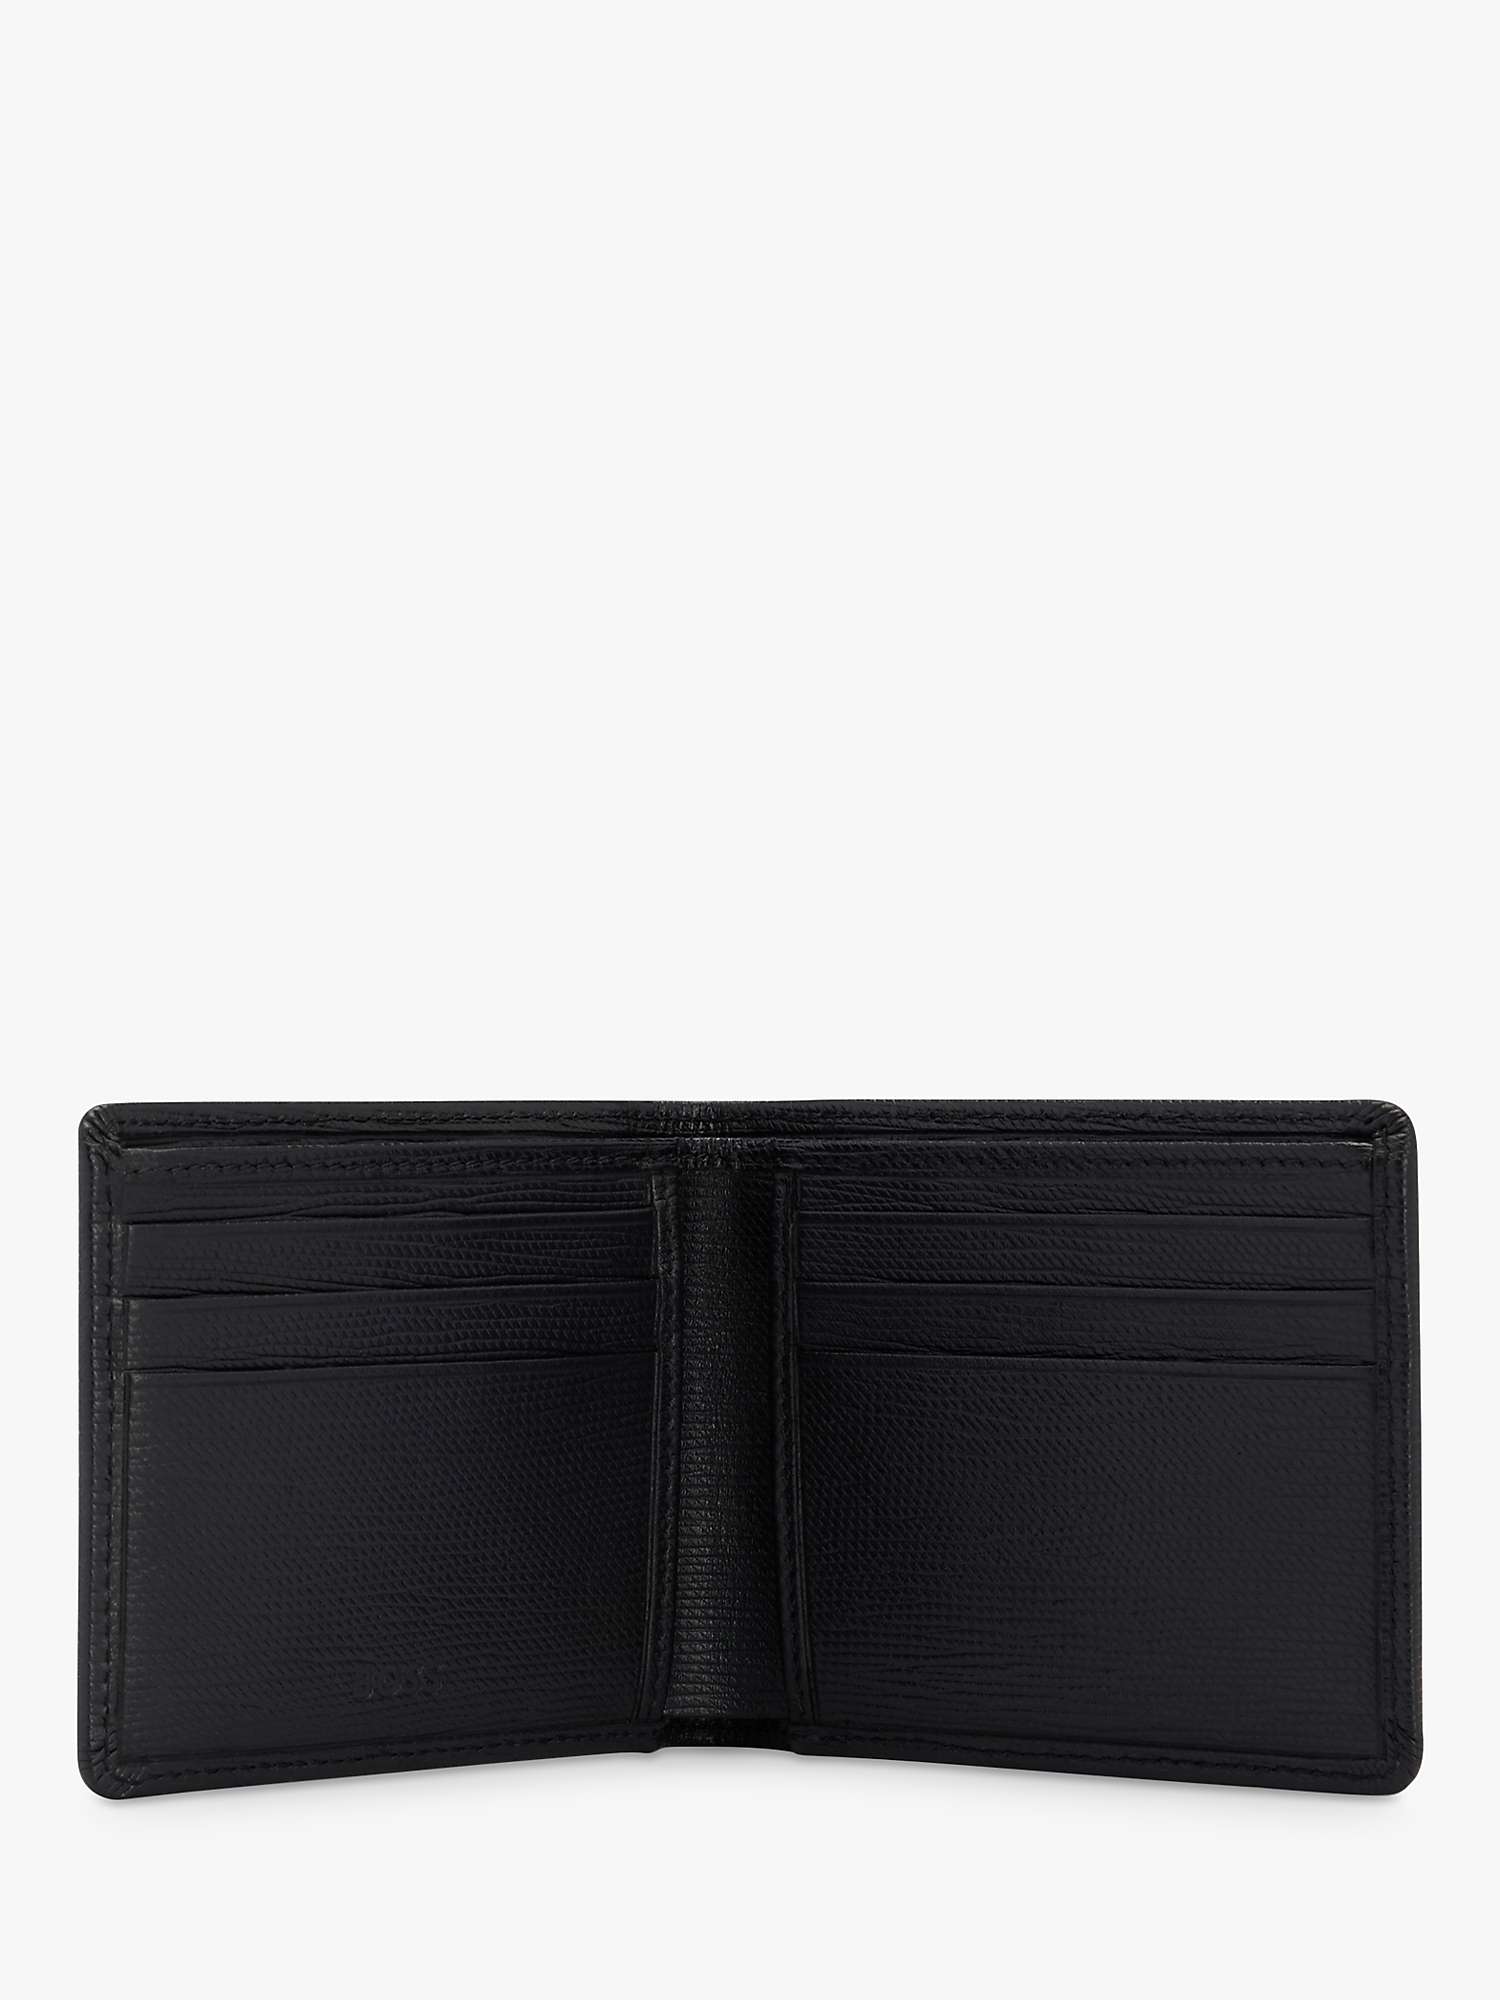 Buy BOSS Gallery 6 Card Slots Tumbled Leather Wallet, Black Online at johnlewis.com